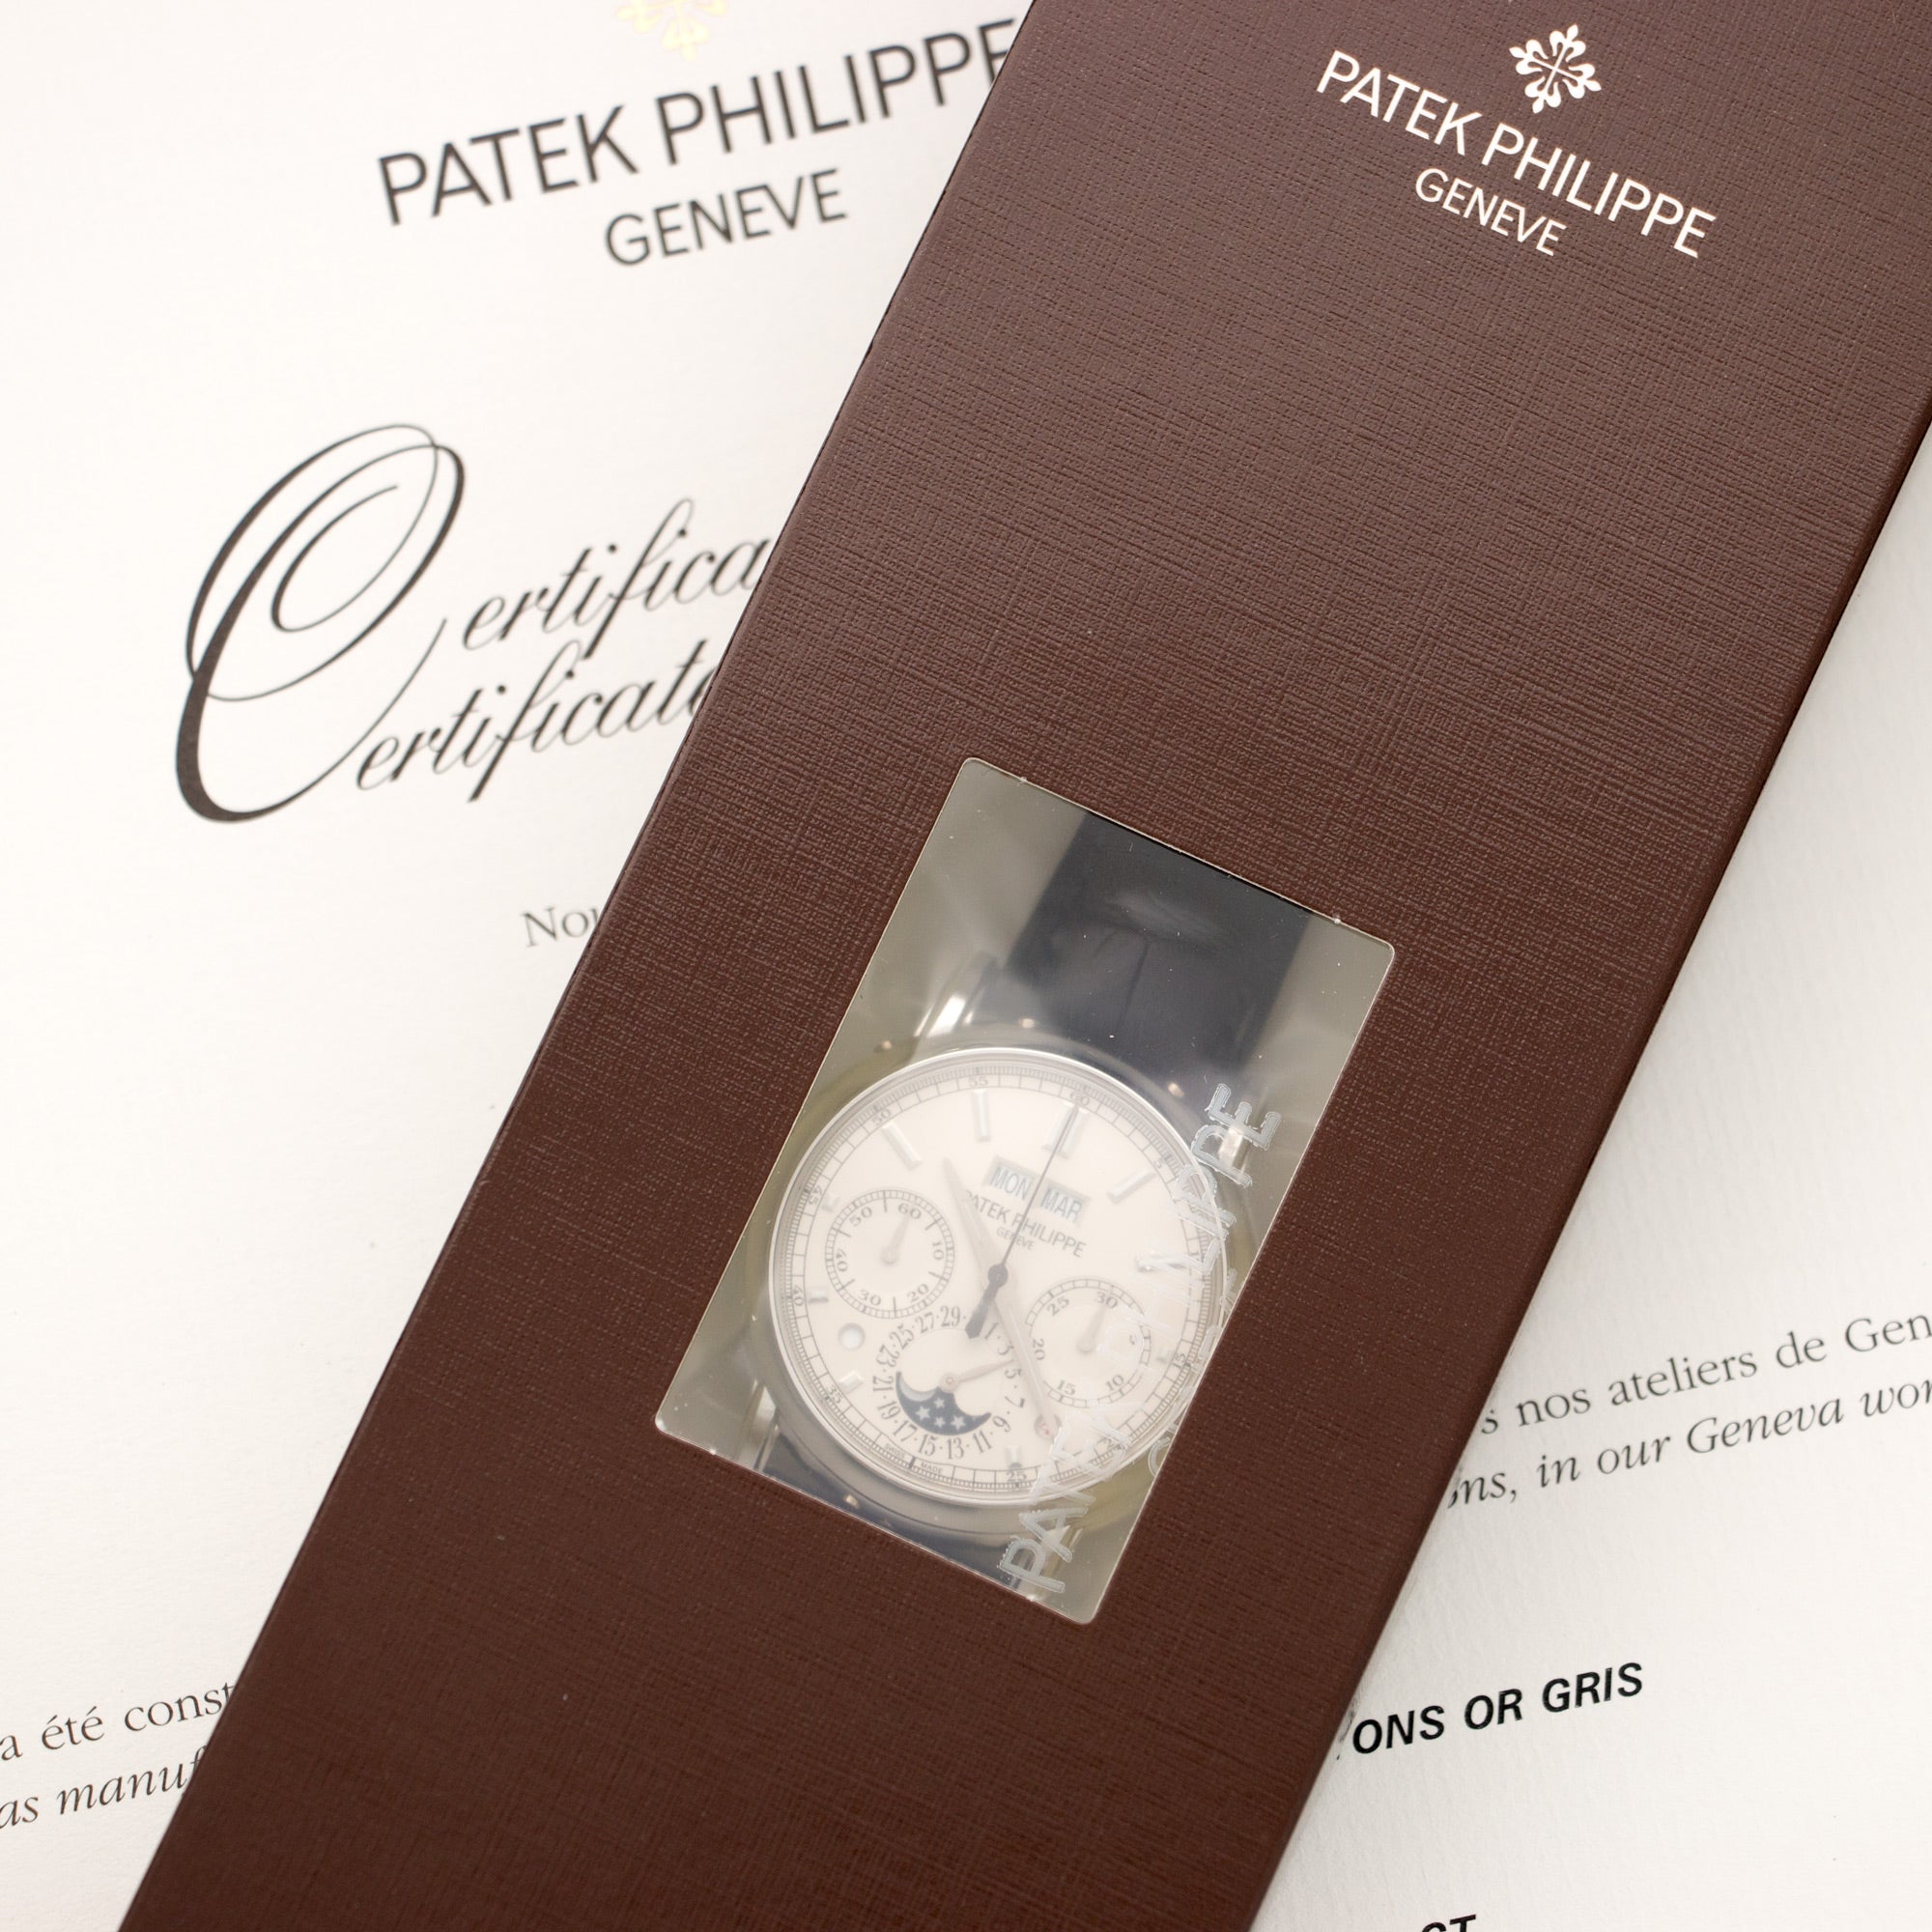 Patek Philippe - Patek Philippe Platinum Perpetual Split Seconds Chrono Watch Ref. 5204 in Double Sealed and Unworn Condition - The Keystone Watches